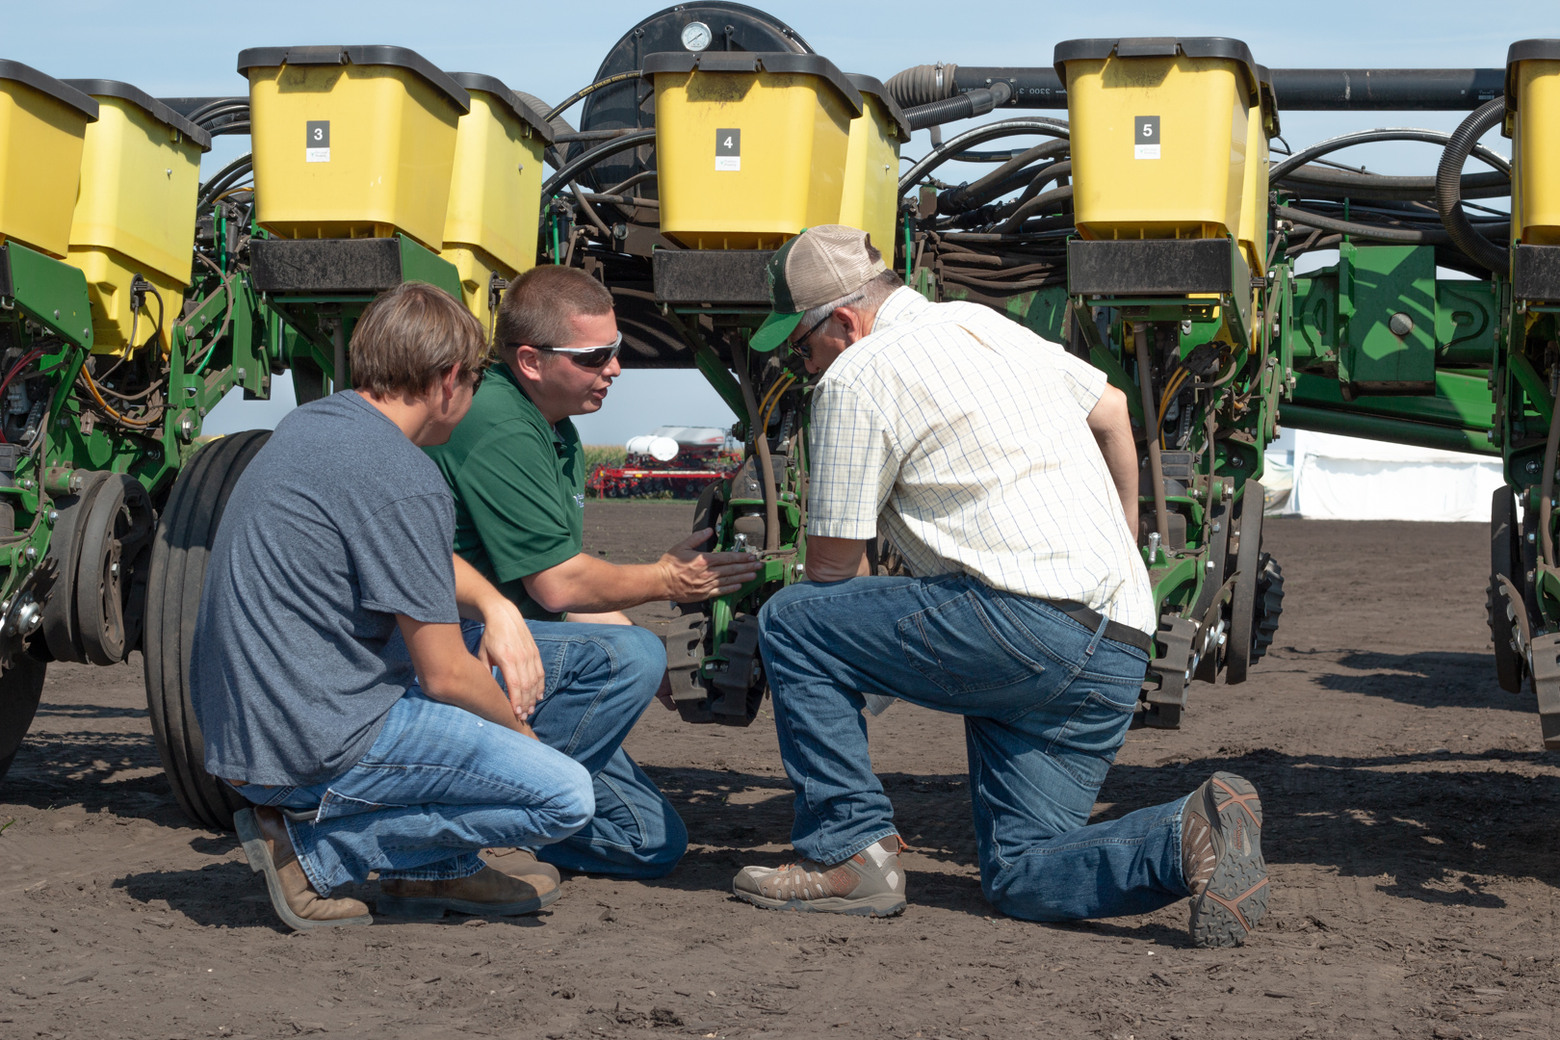 Farmers behind a planter looking at technology.